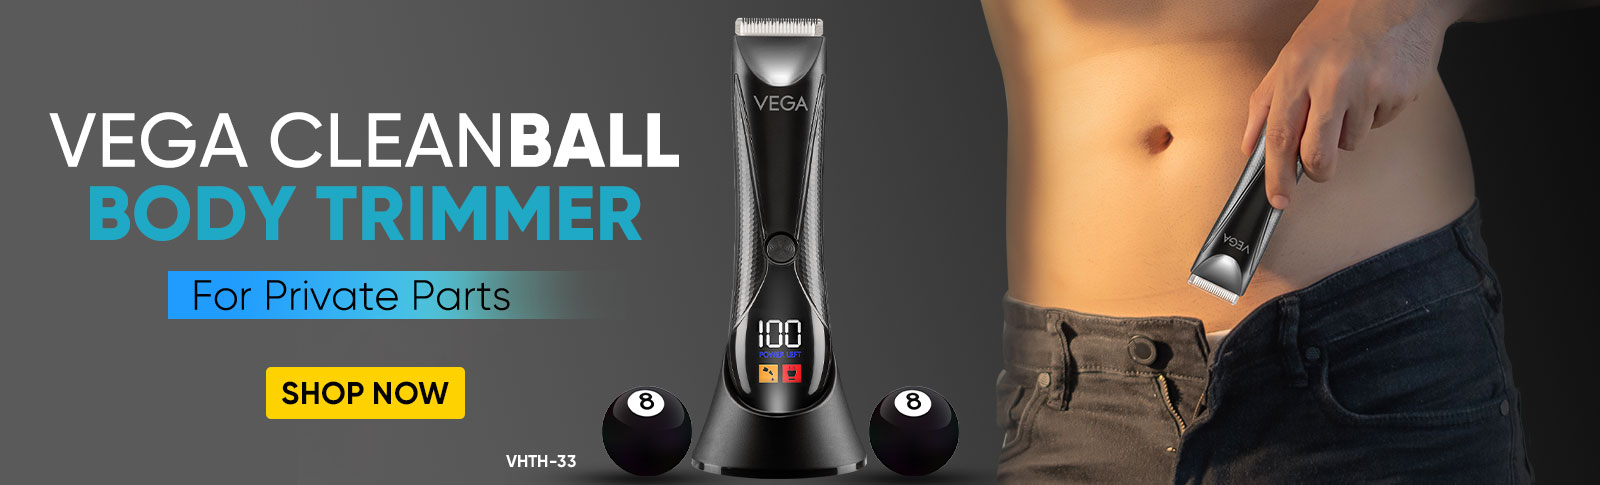 CleanBall Body Trimmer